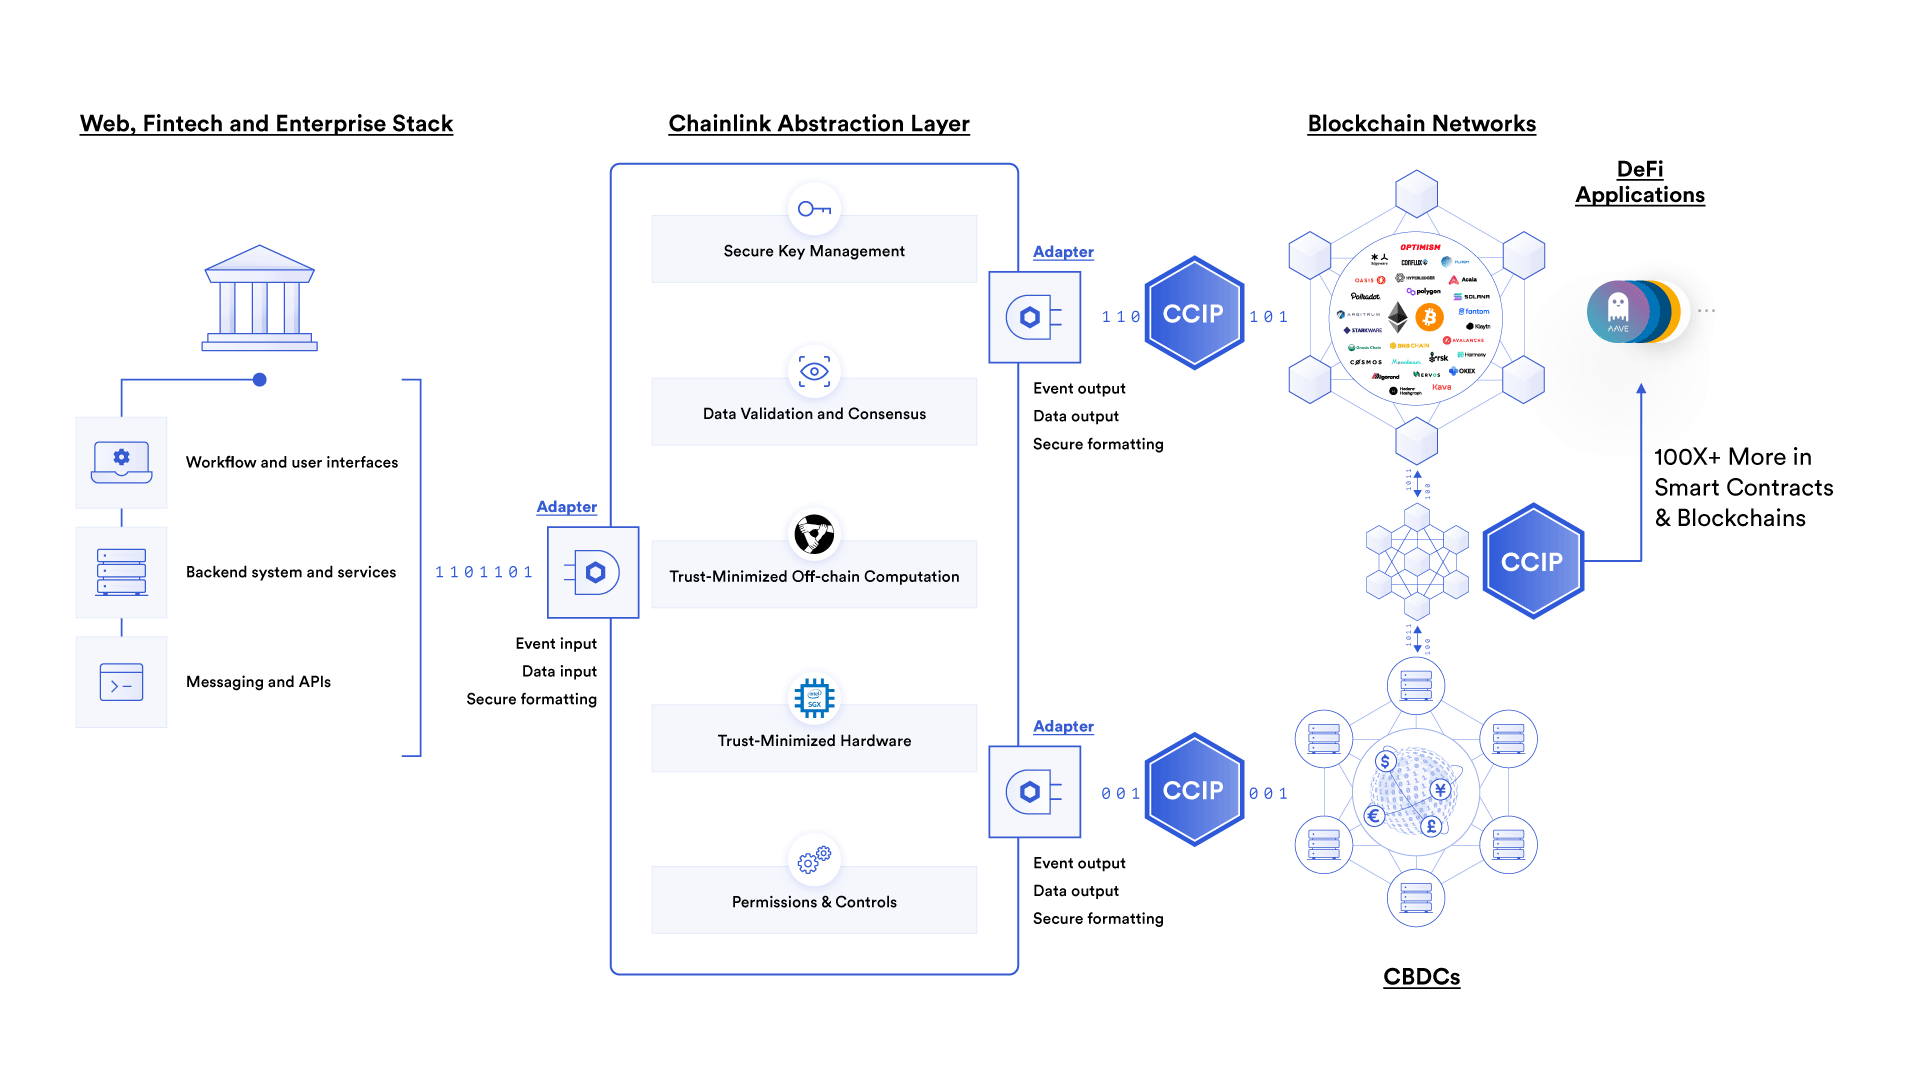 Chainlink supports the financial services industry.